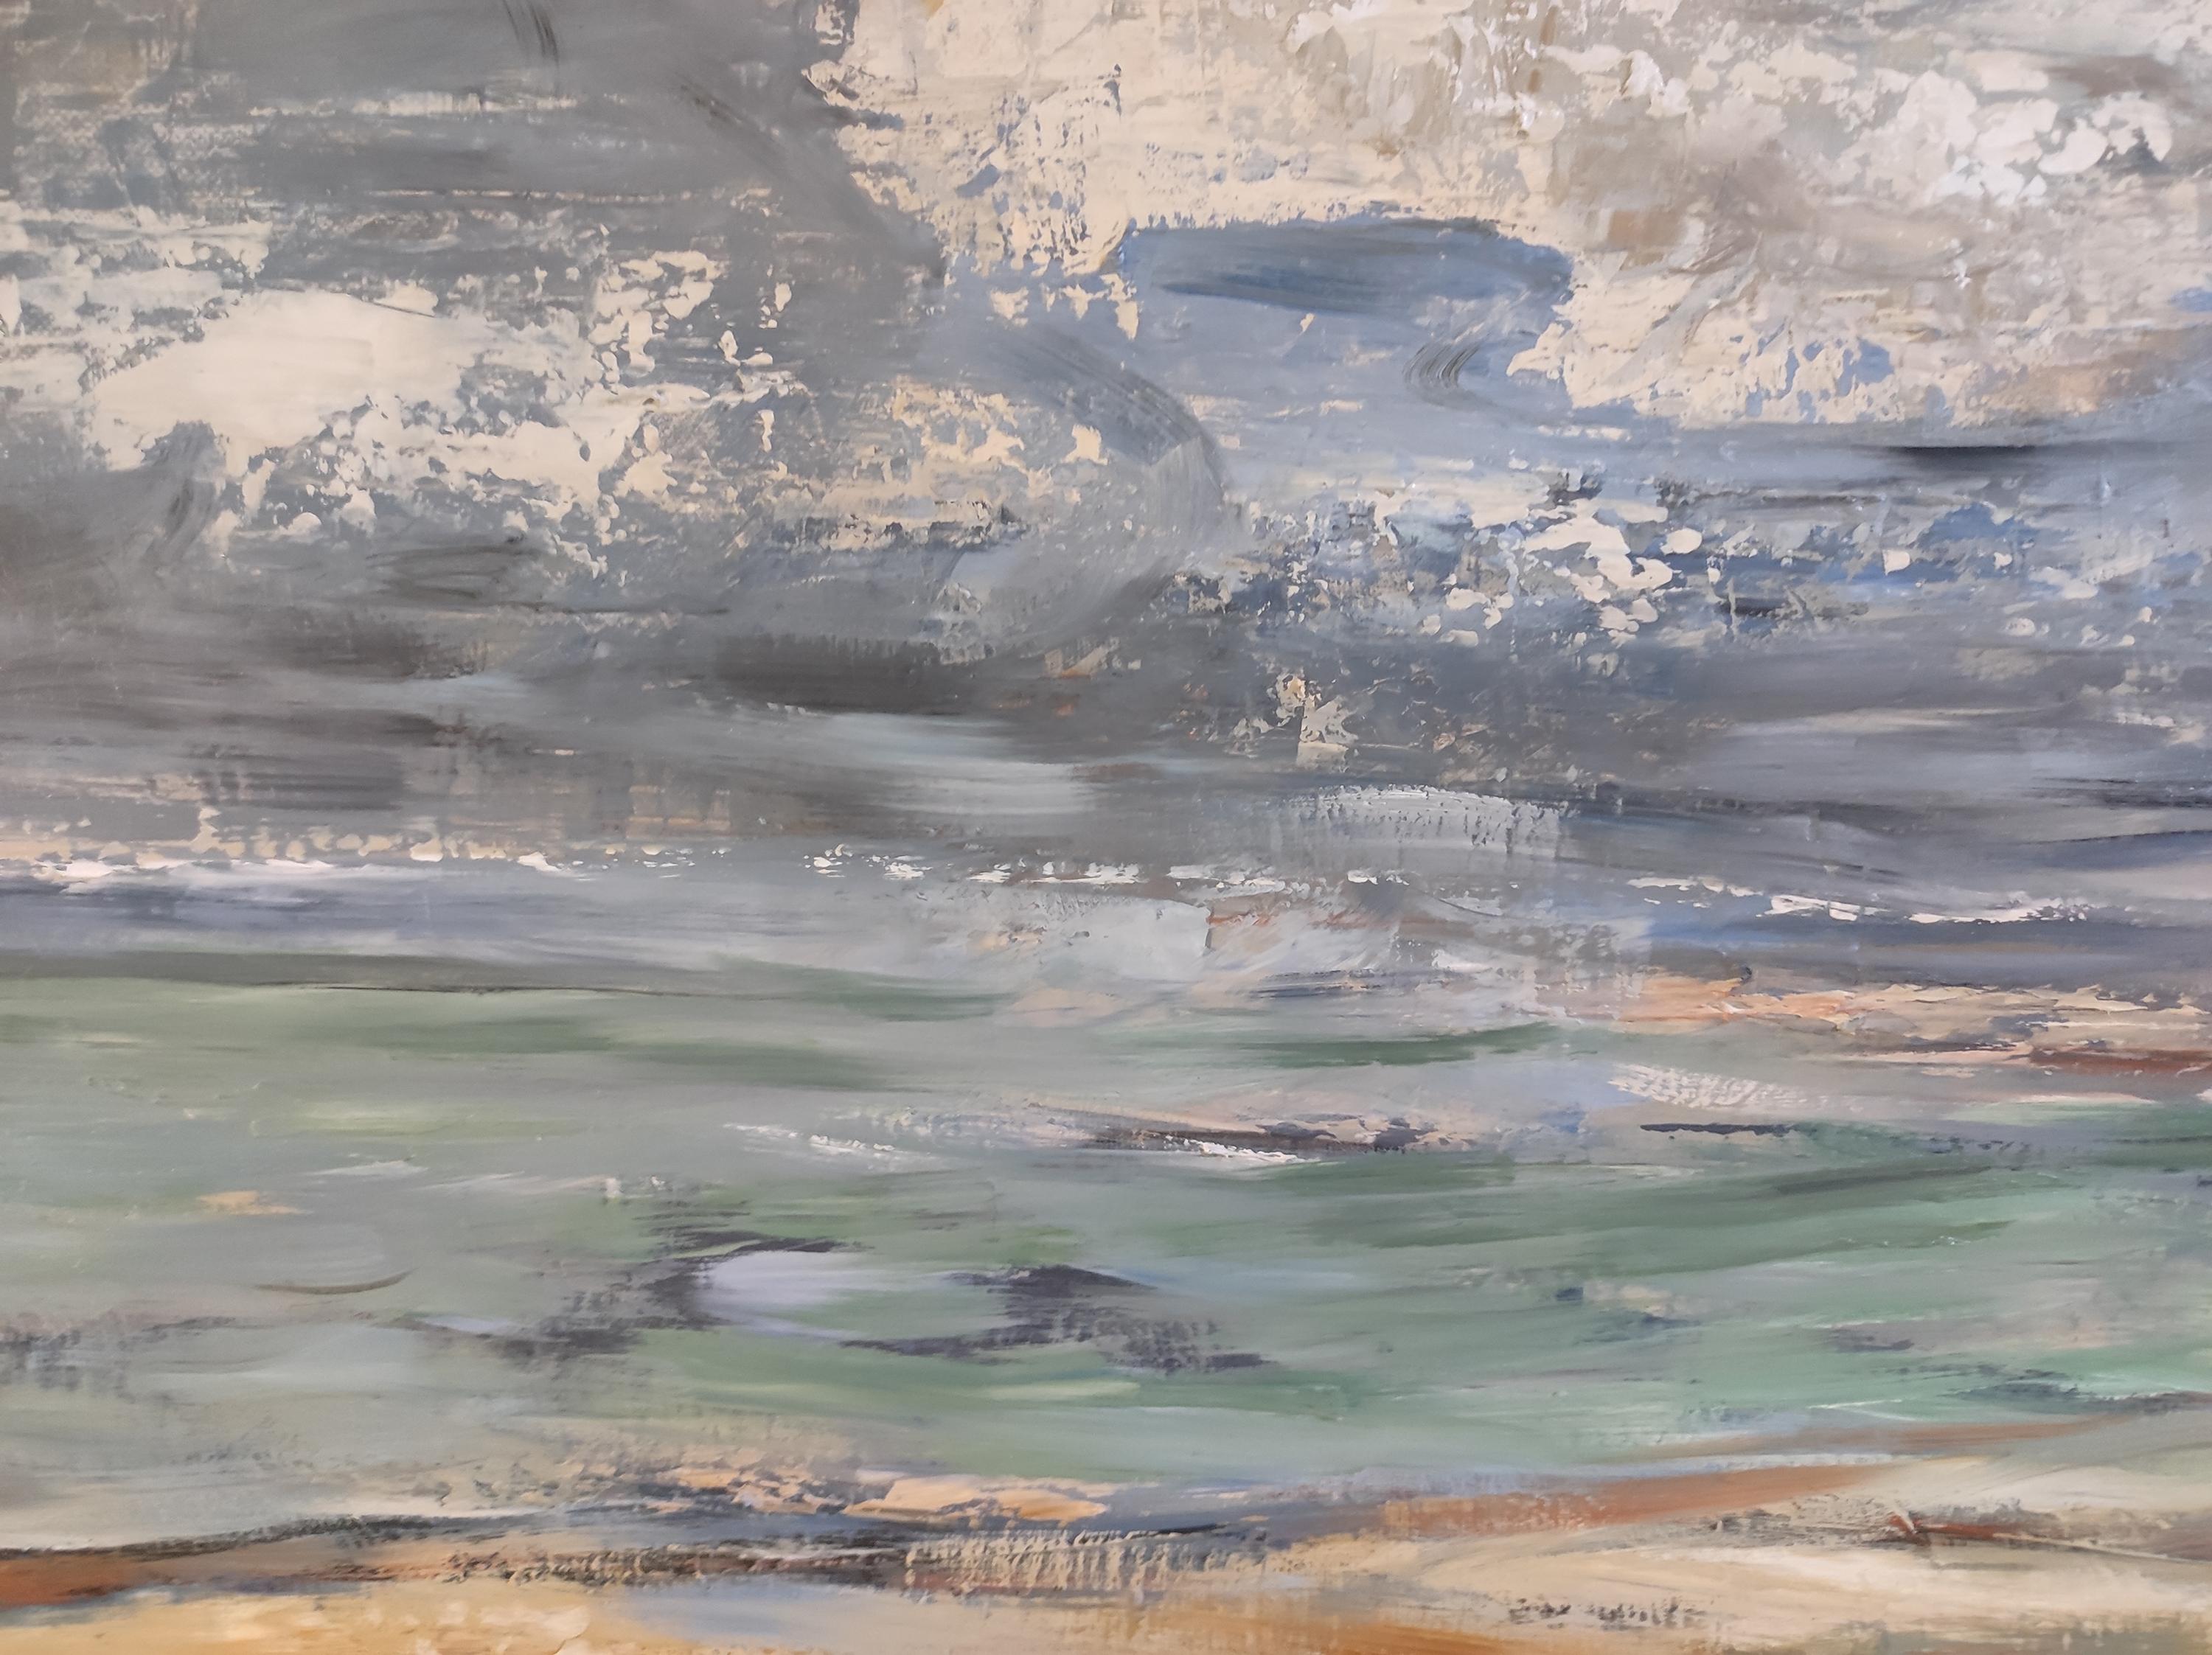 Deauville beach under stormy skies and its lights so special to Normandy
Landscape, marine, between sky and sea, treated with oil and knife. The sky looks like a free variation bordering on abstraction.
The sky is painted in full paste in a brightly